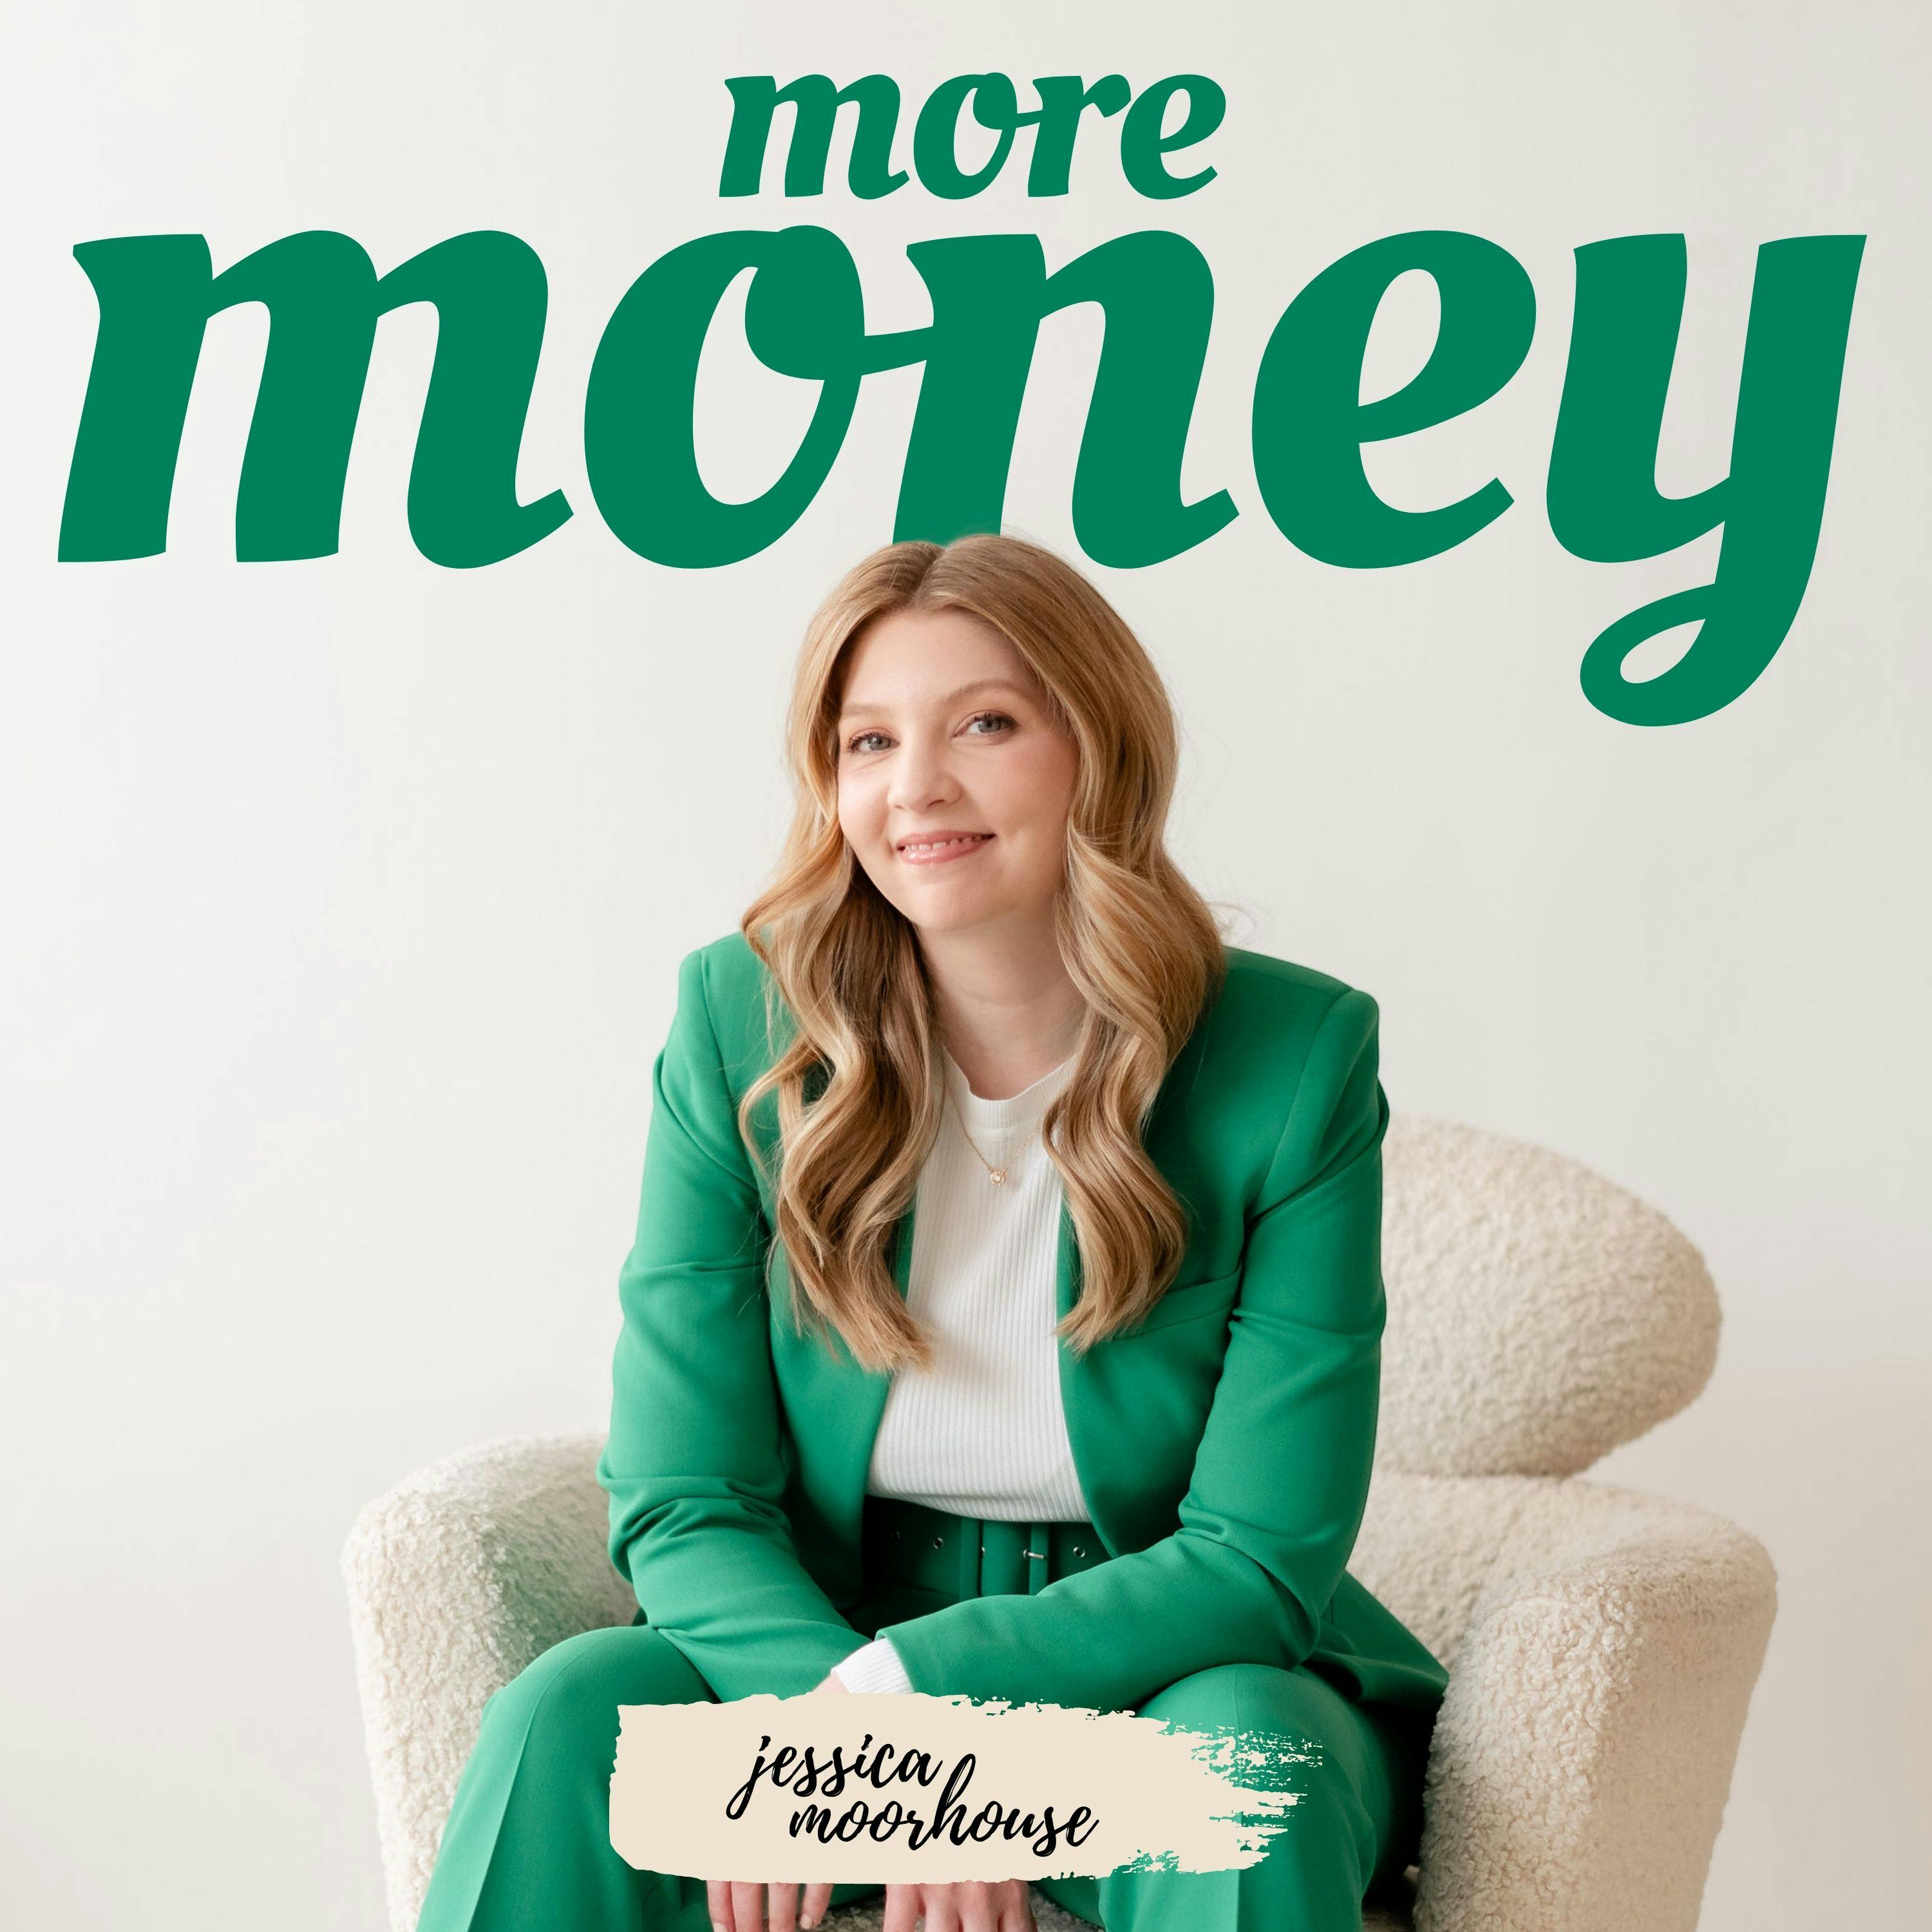 075 Listener Series - How Jessica Paid Off $40,000 in Debt in 3 Years as an Artist